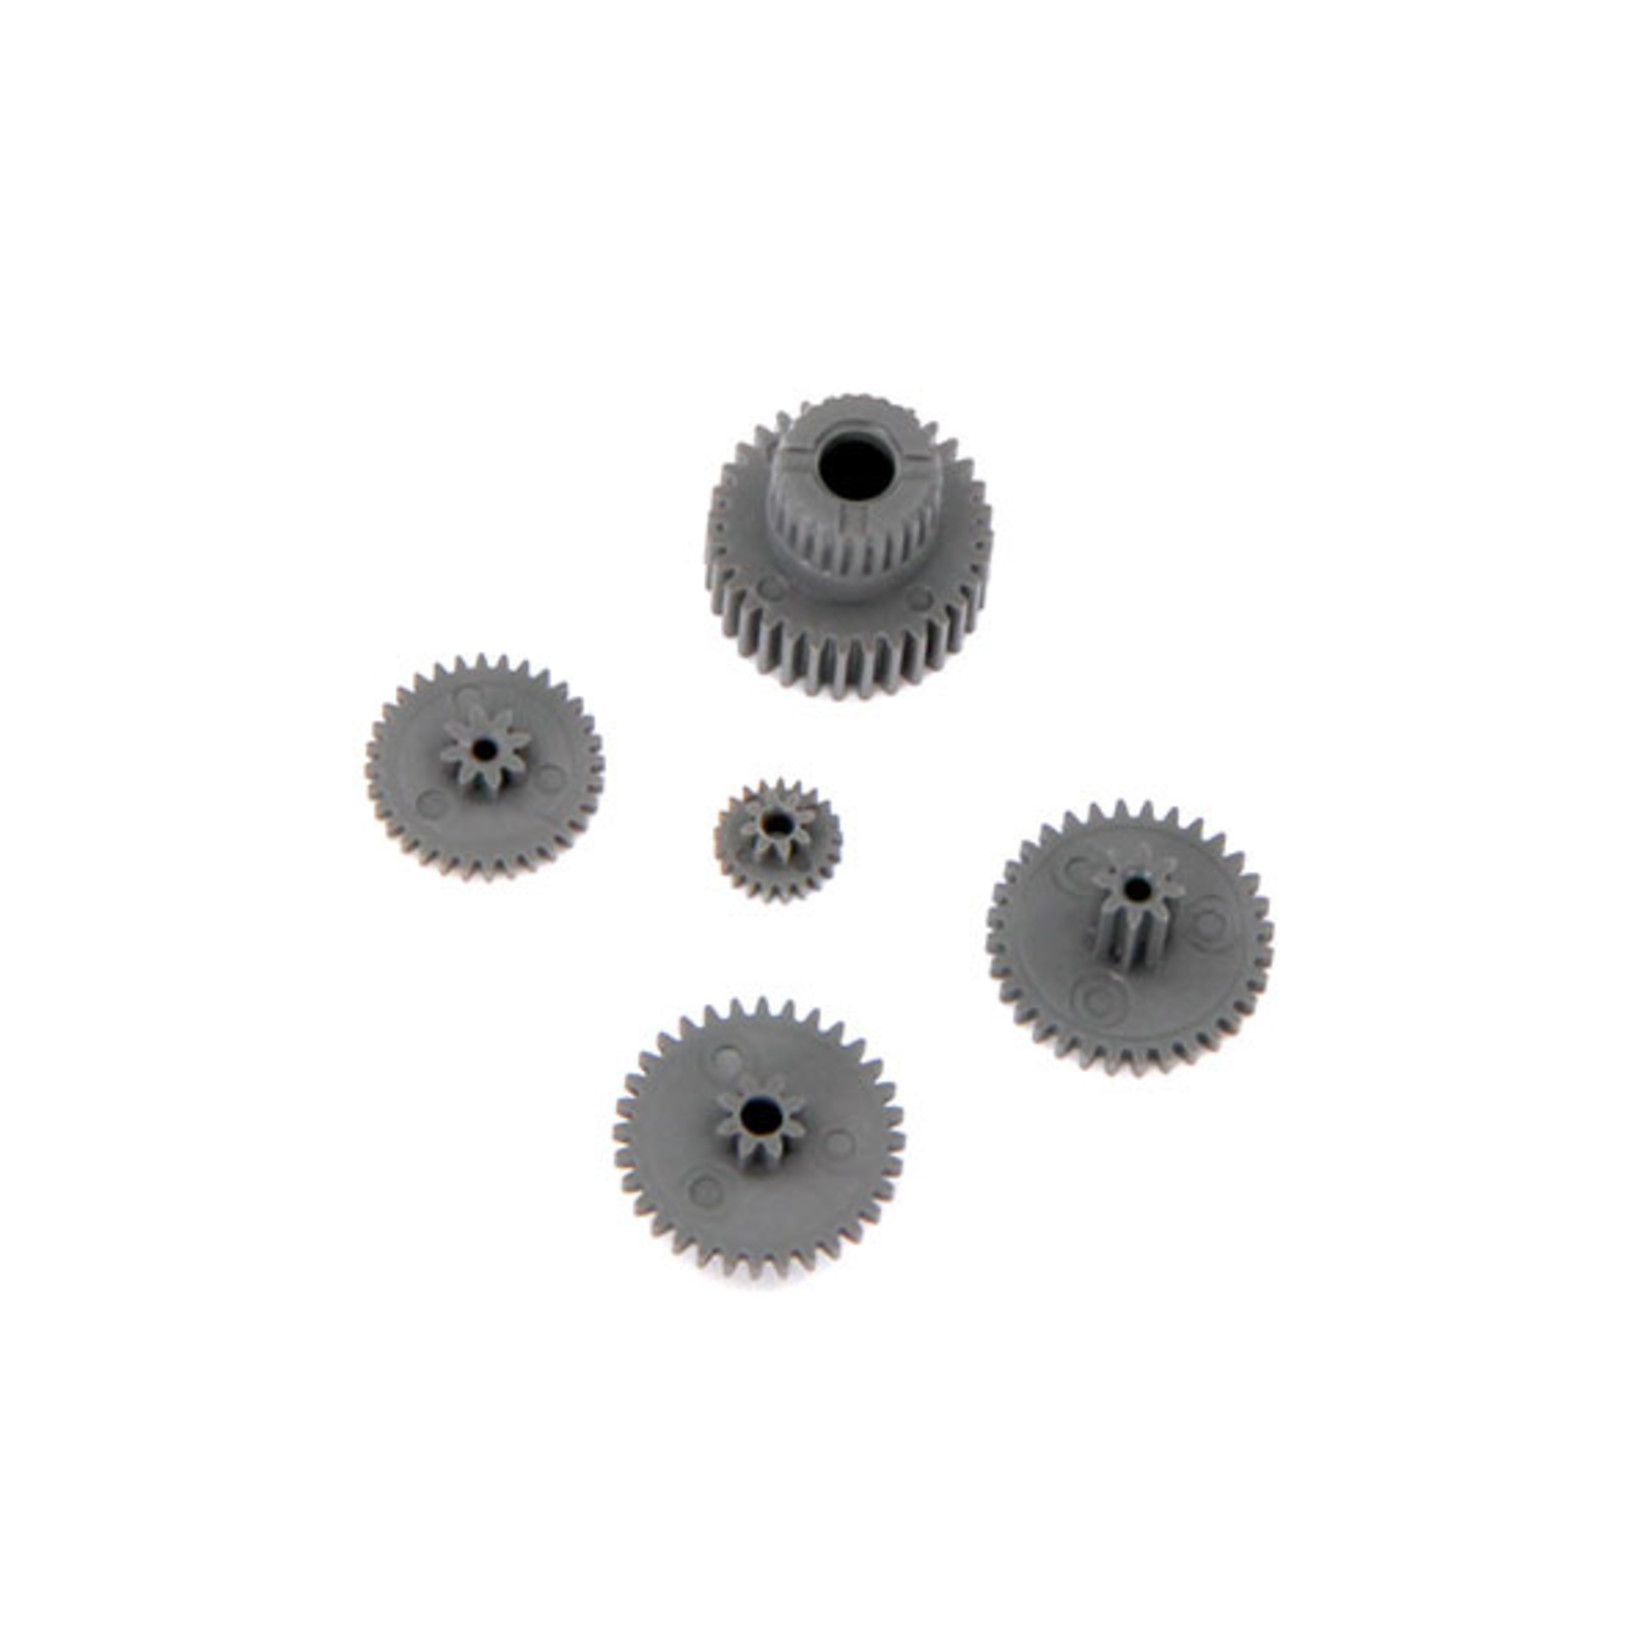 Traxxas 2064A - Gear set (for 2065A waterproof sub-micro s